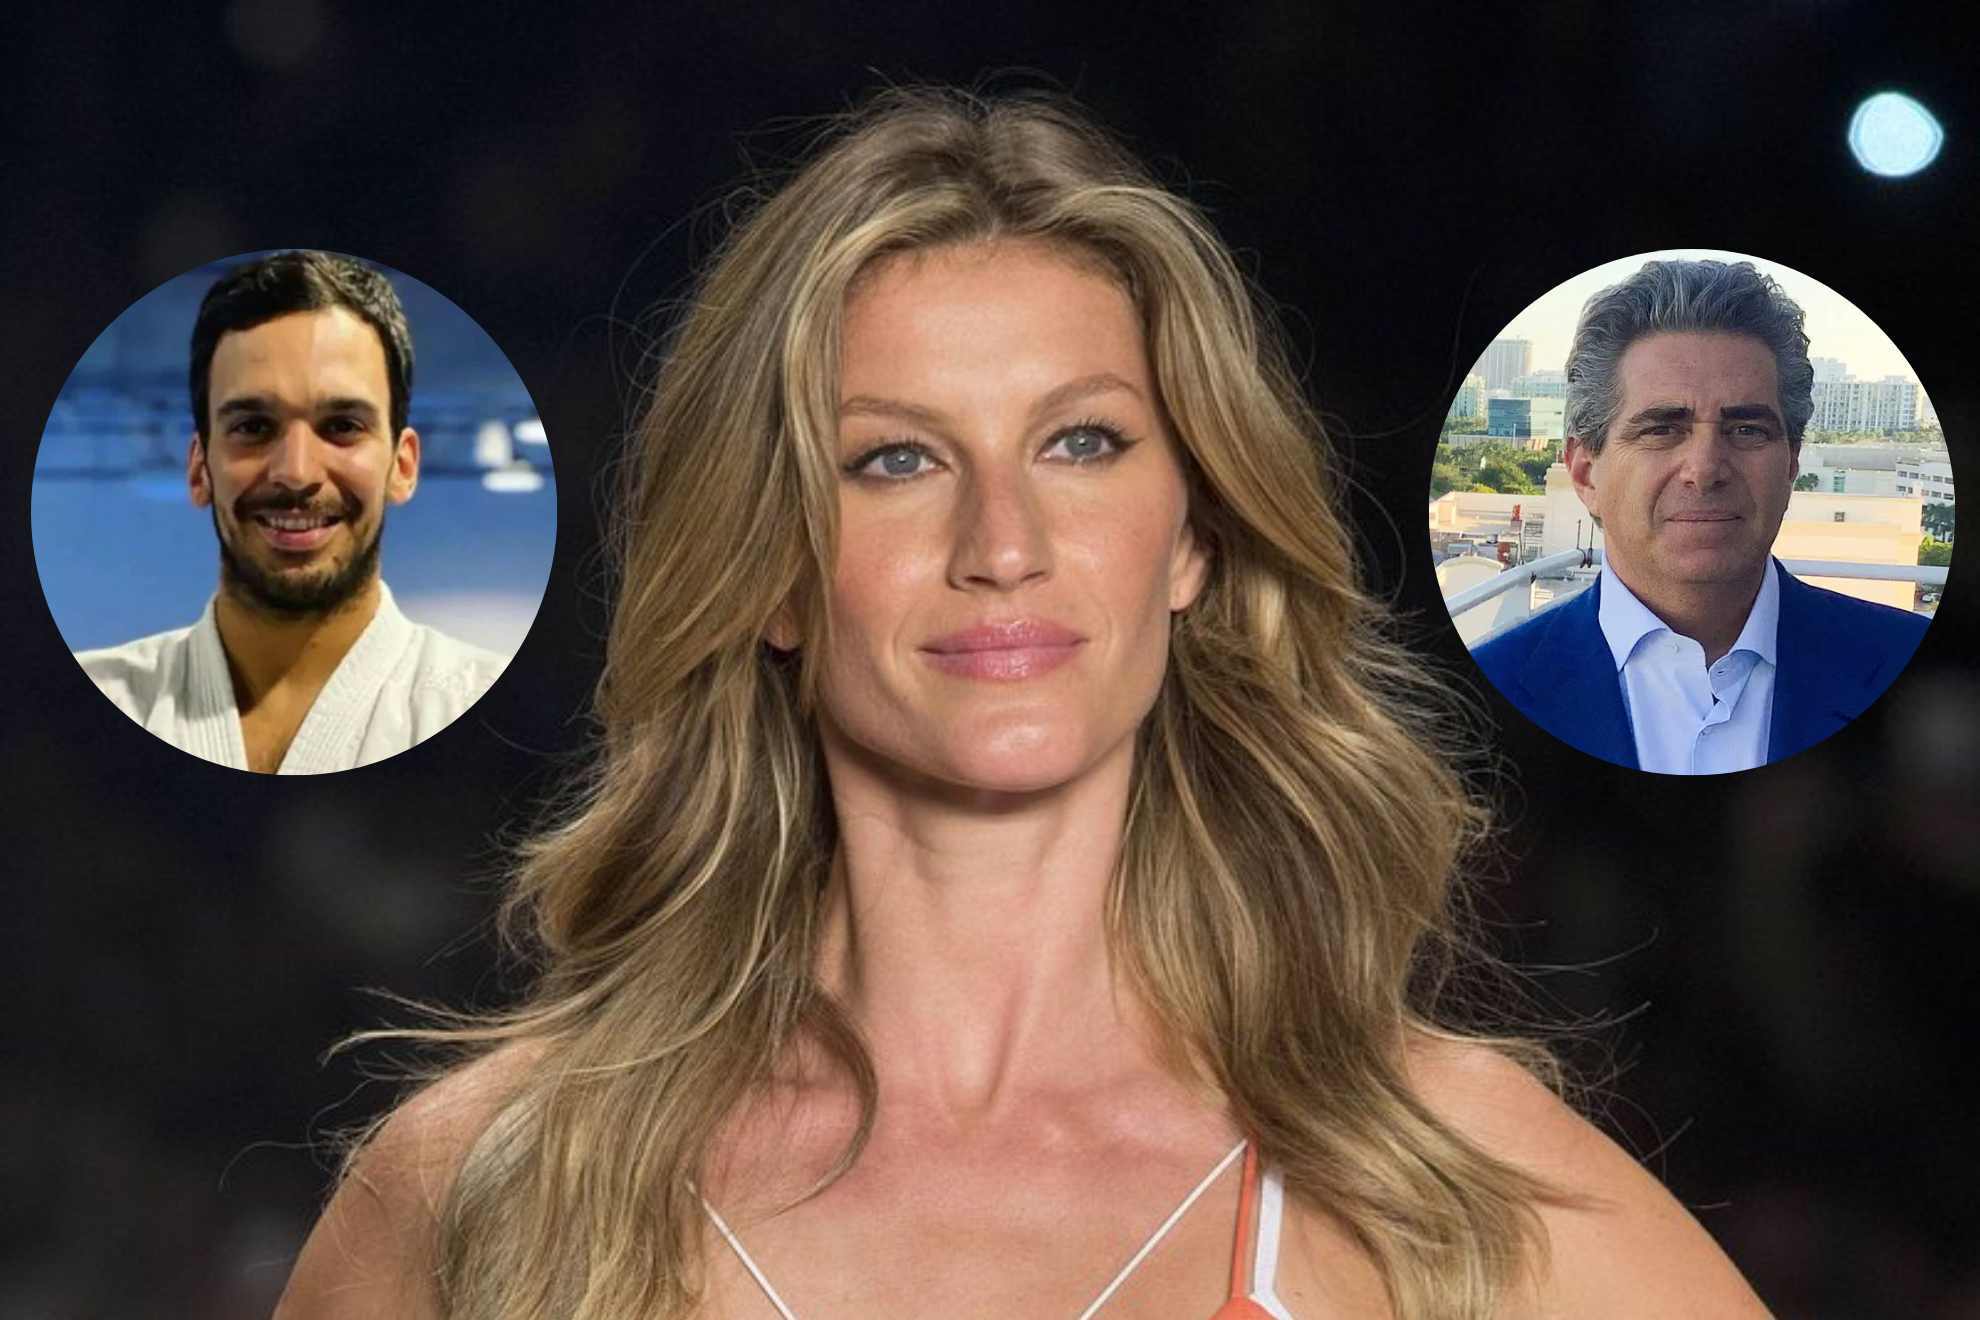 Gisele Bndchen has been romantically linked with Joaquim Valente (left) and Jeffrey Soffer (right). Did she just deny it all?